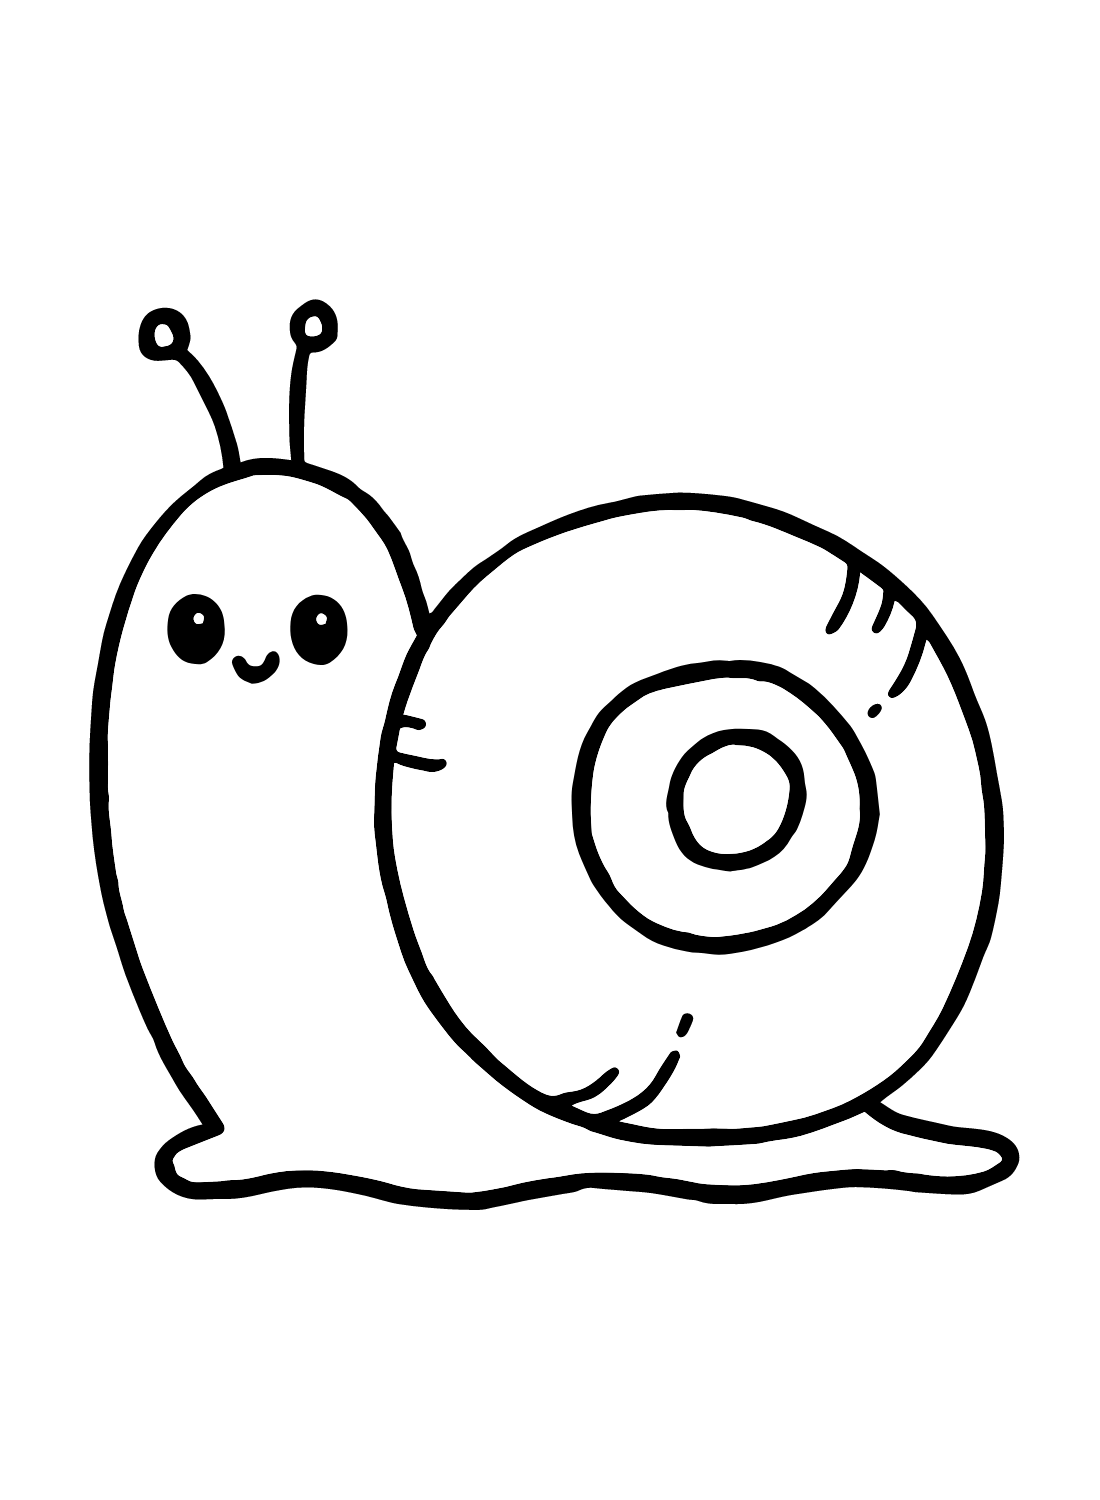 Adorable Snail from Snail